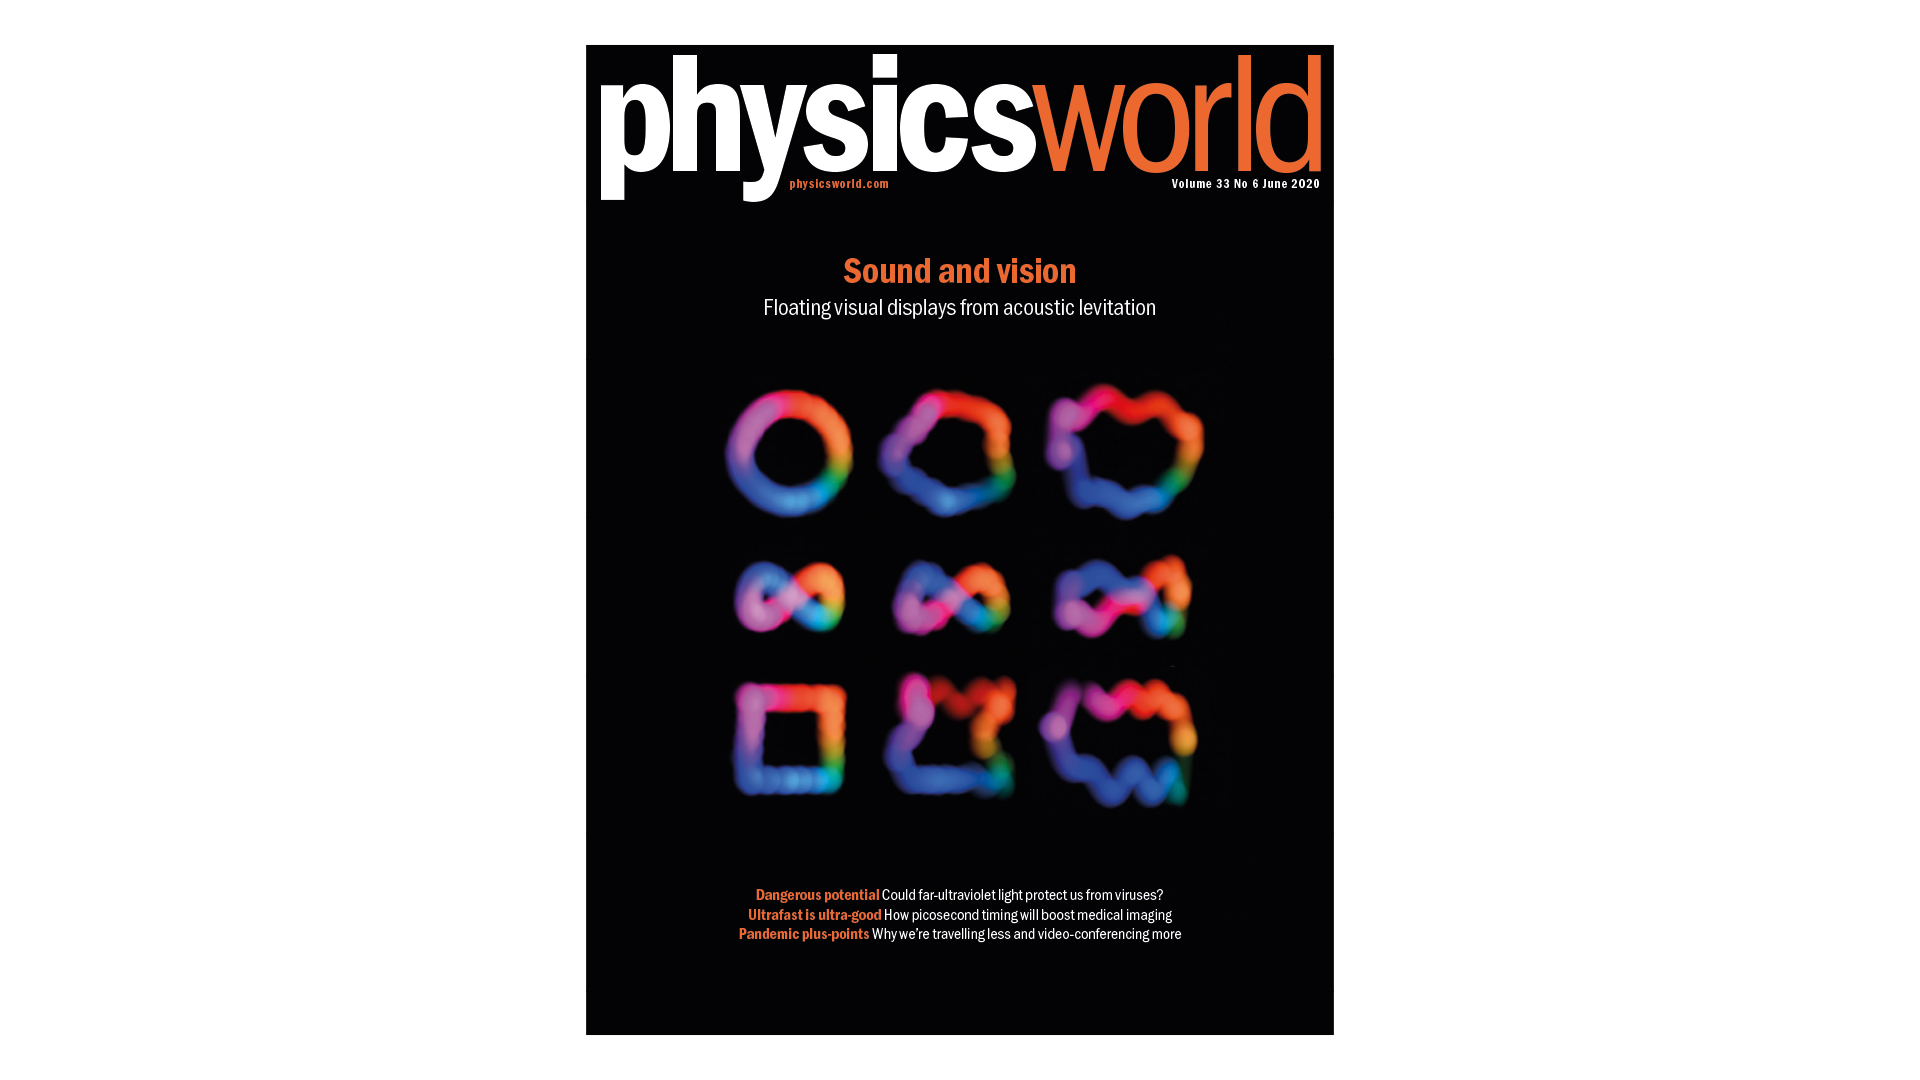 Physics World – indispensable, trusted daily news throughout the